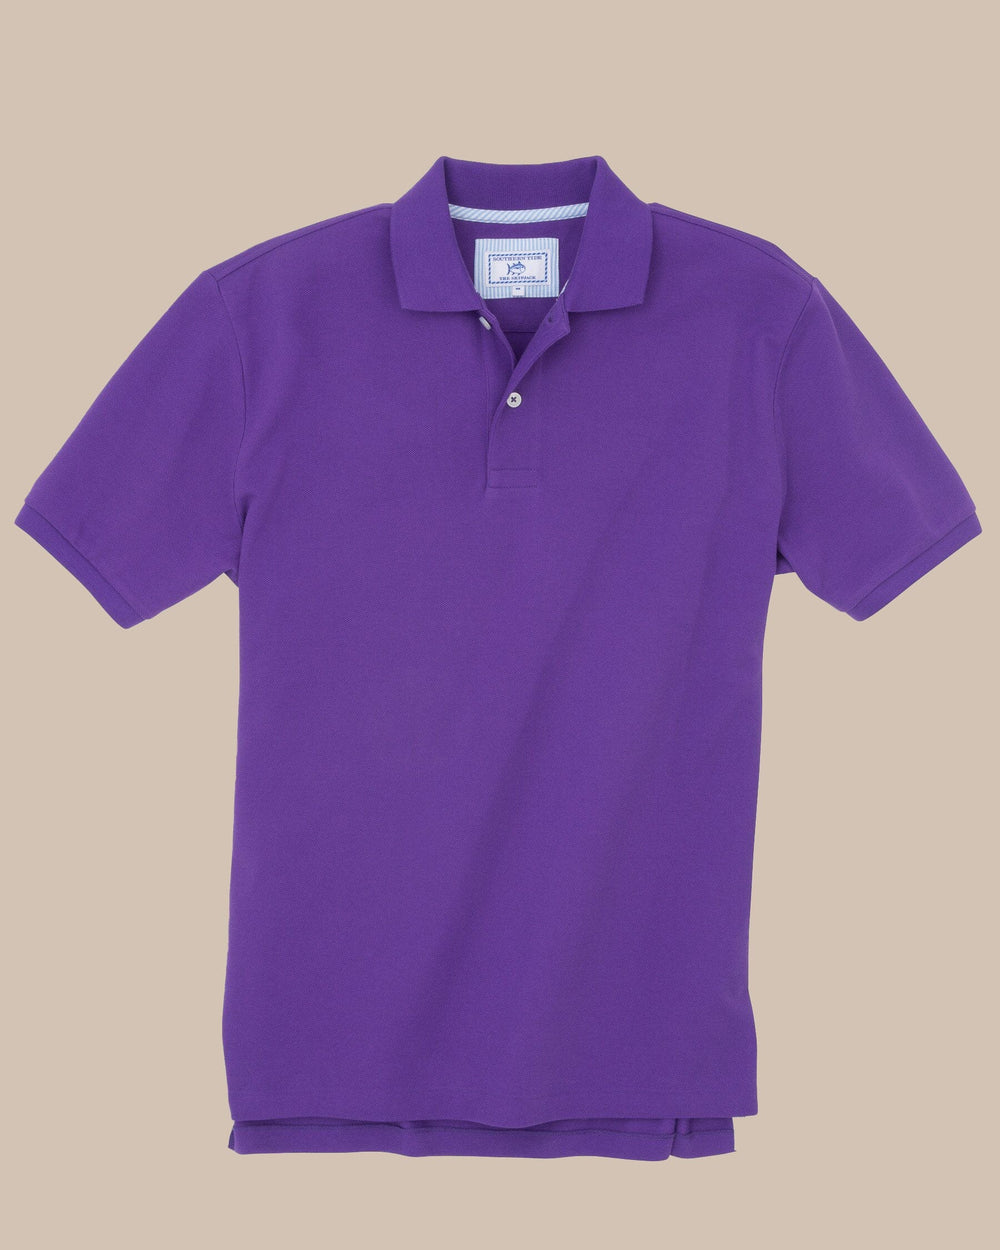 The front view of the Men's Purple Skipjack Gameday Colors Polo Shirt by Southern Tide - Regal Purple